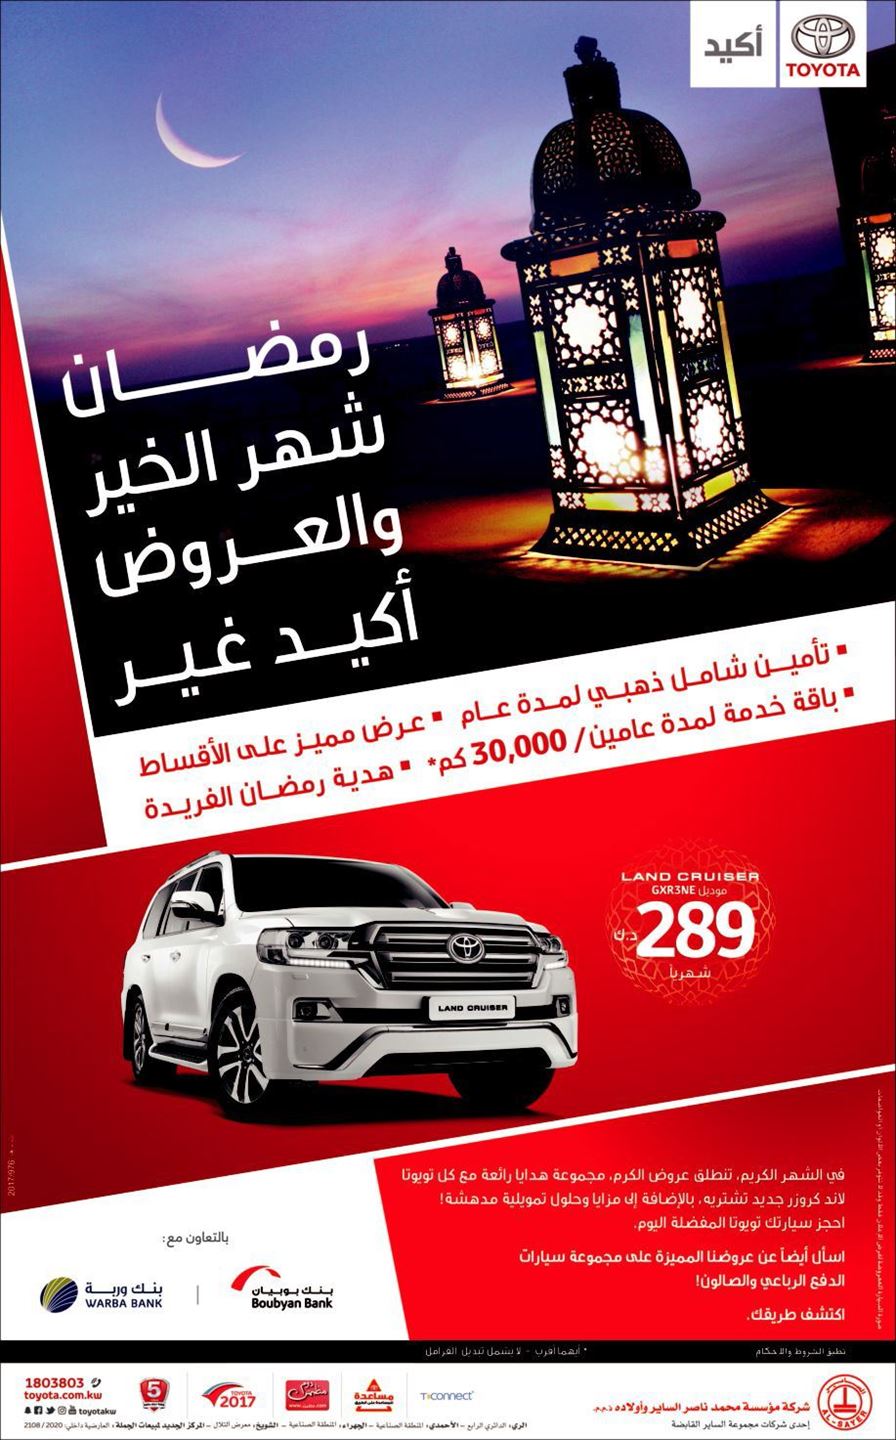 Toyota Offers in cooperation with Boubyan Bank and Warba Bank